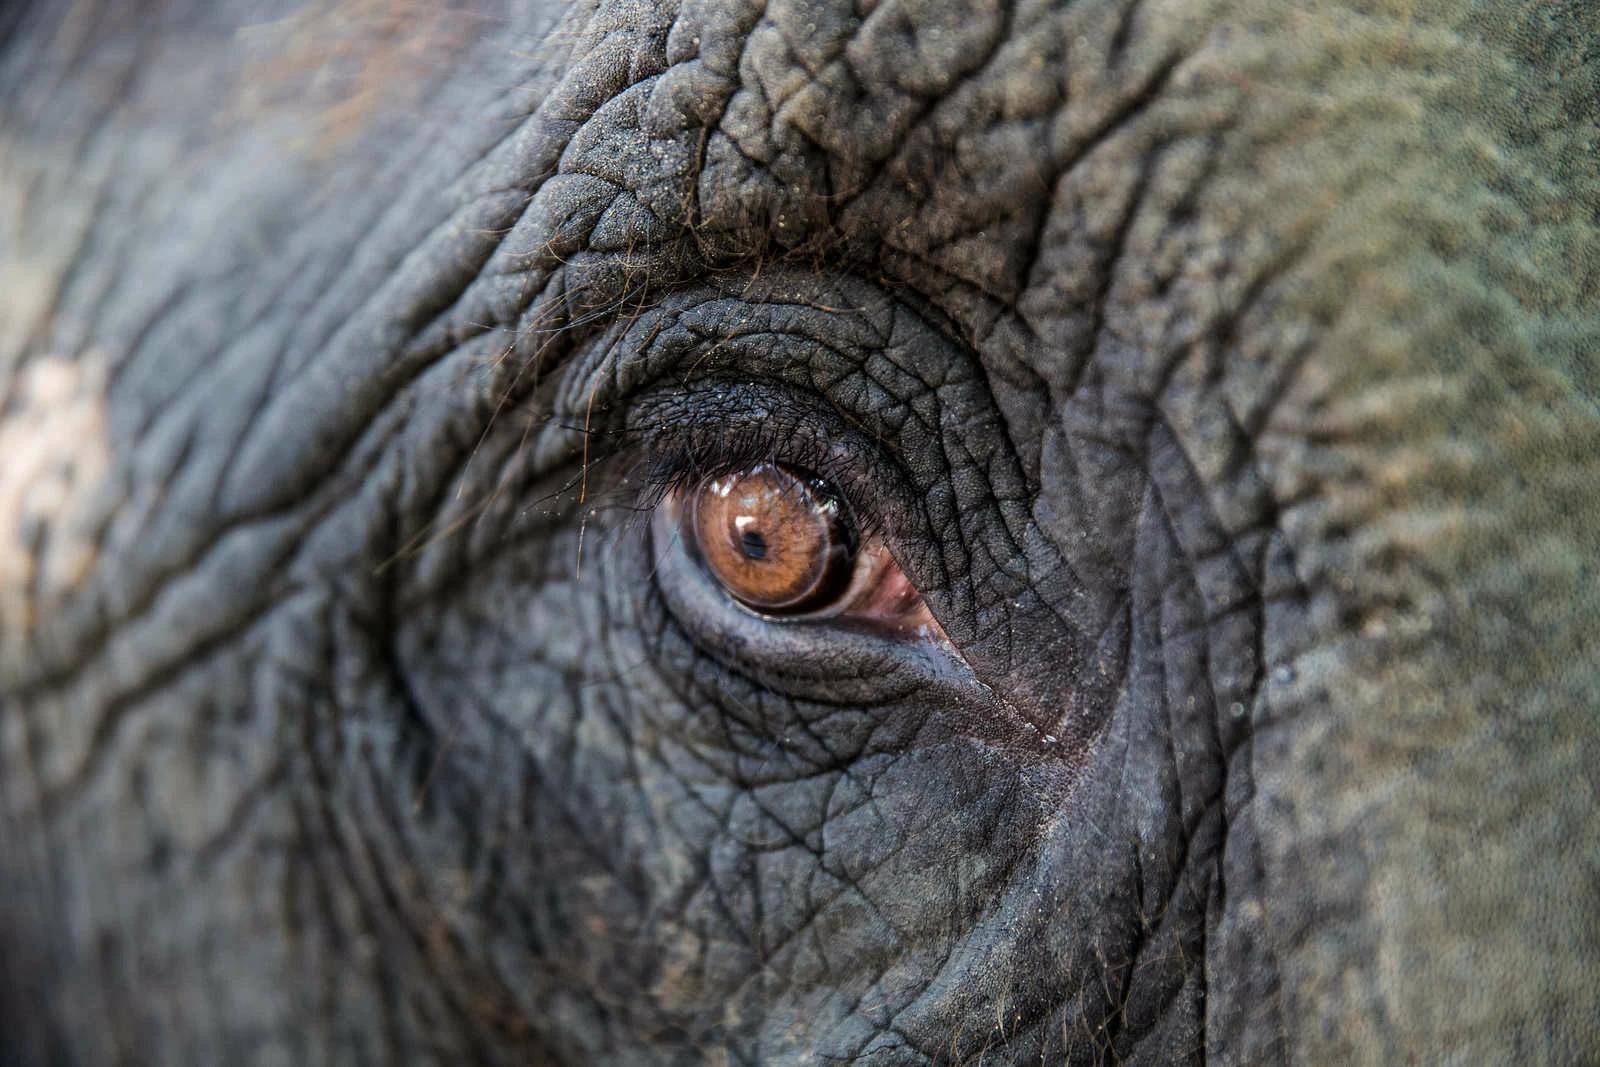 A closeup of Mosha’s eye at the Friends of the Asian Elephant hospital in Lampang, Thailand. Mosha is one of over a dozen elephants who have been wounded by landmines on the Burmese border, the site of an ongoing civil war. Photo and story credits by Taylor Weidman.